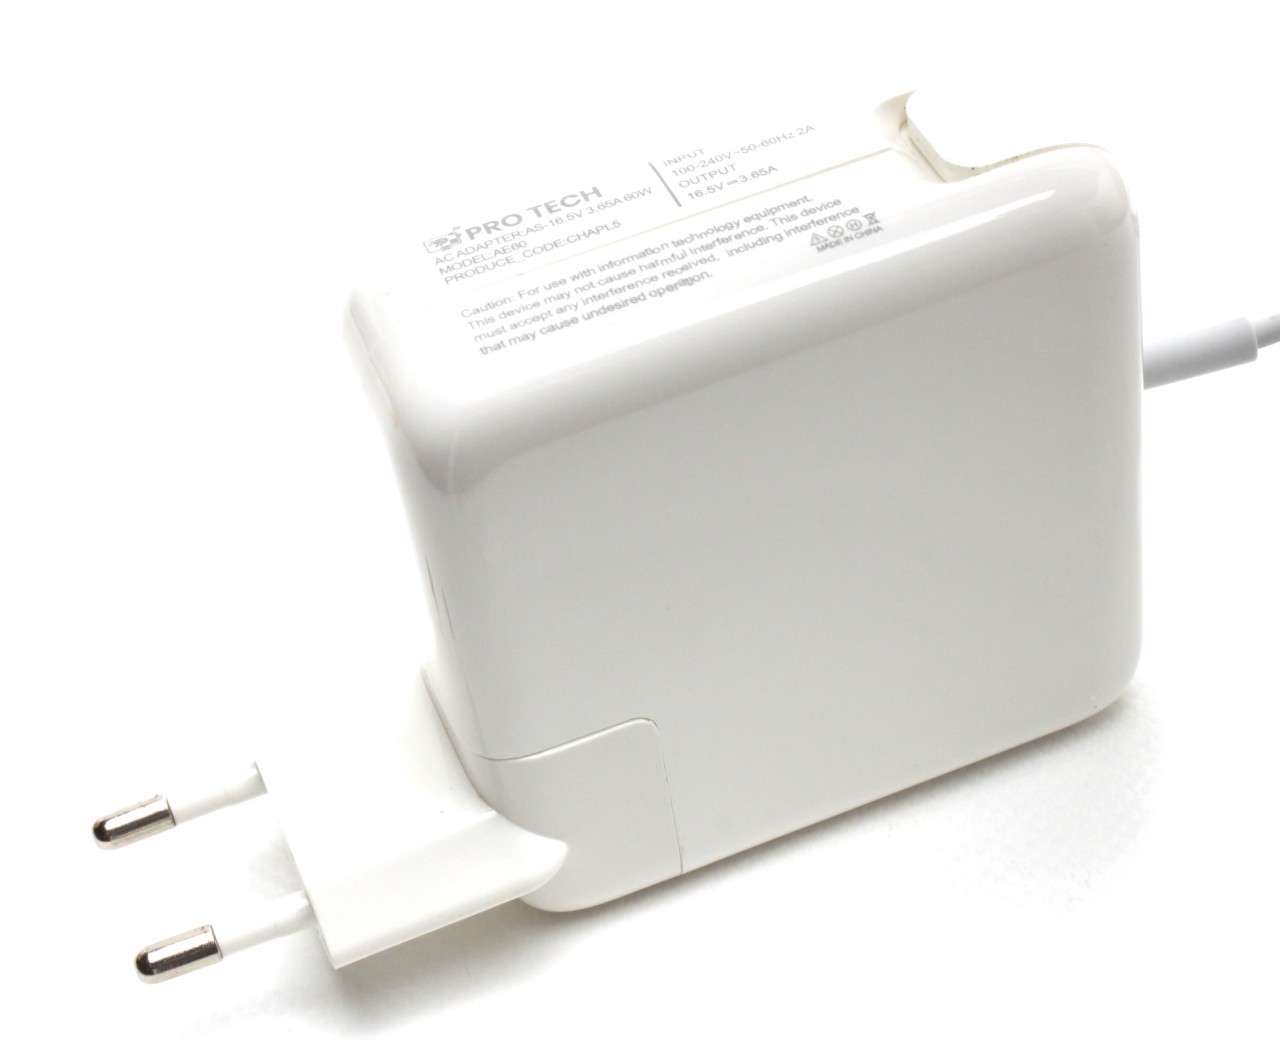 Incarcator Apple MD565LL 60W Replacement Apple imagine noua reconect.ro